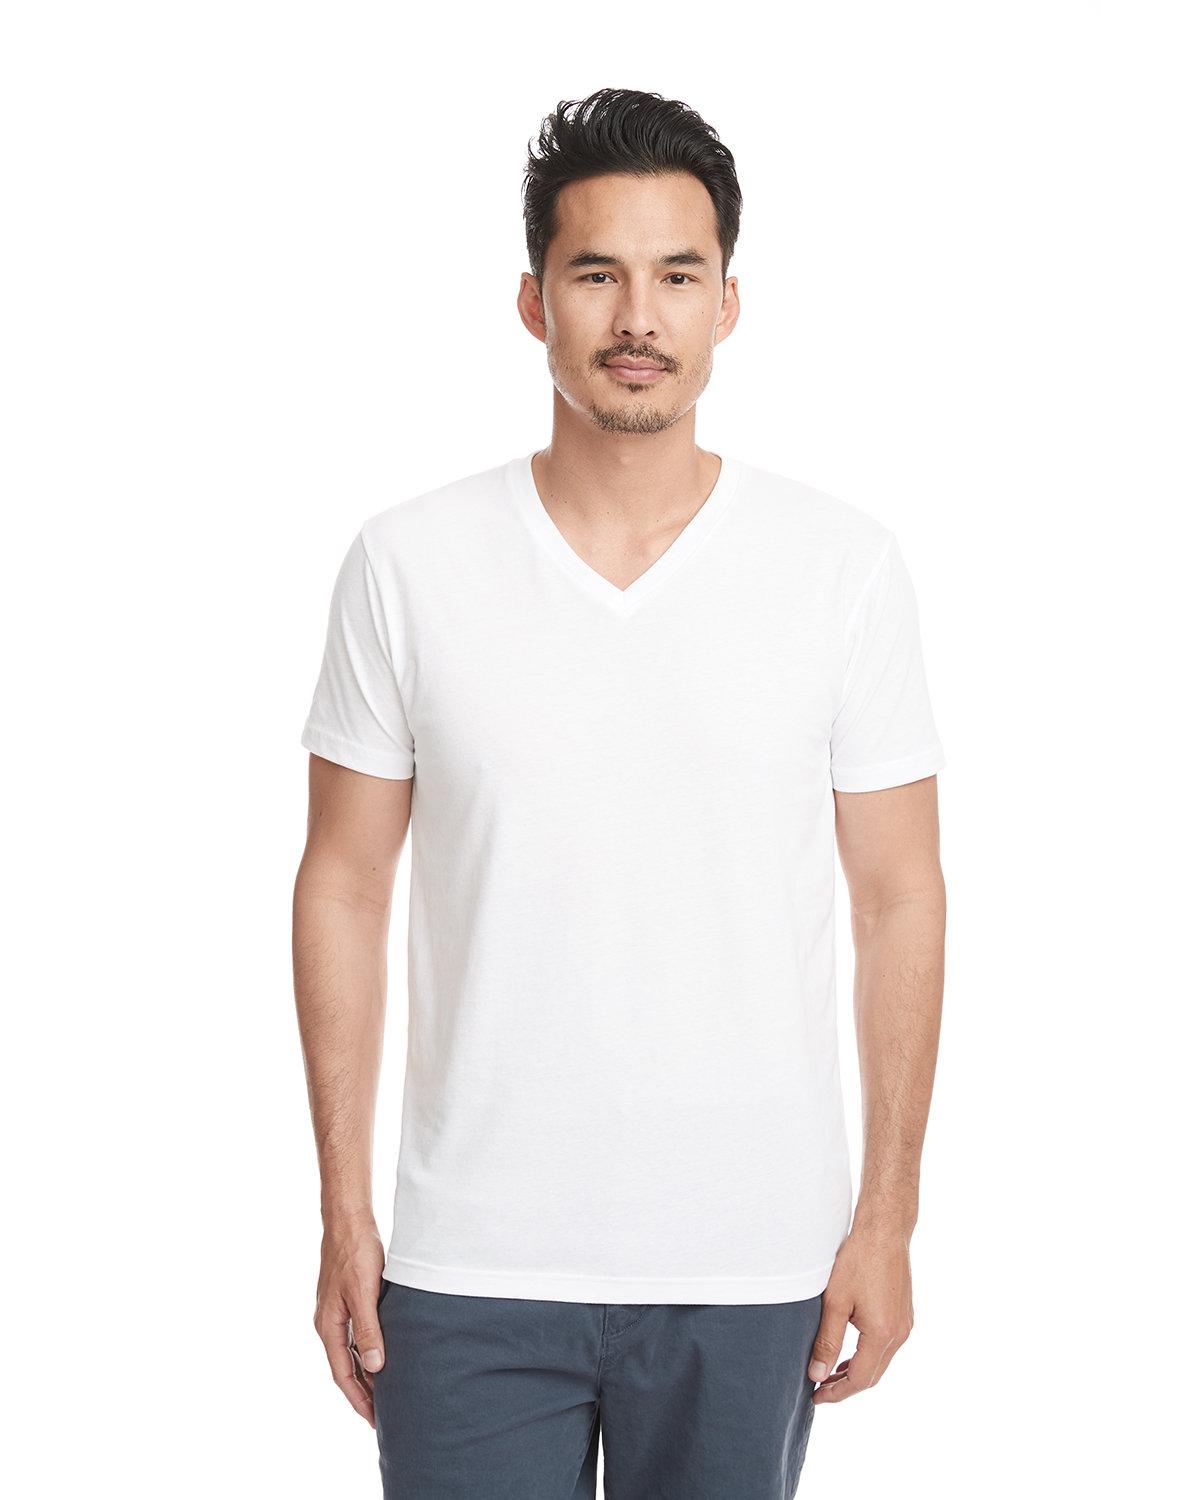 Next Level 6440 Men's Fitted Sueded V-Neck Tee - Shirtmax